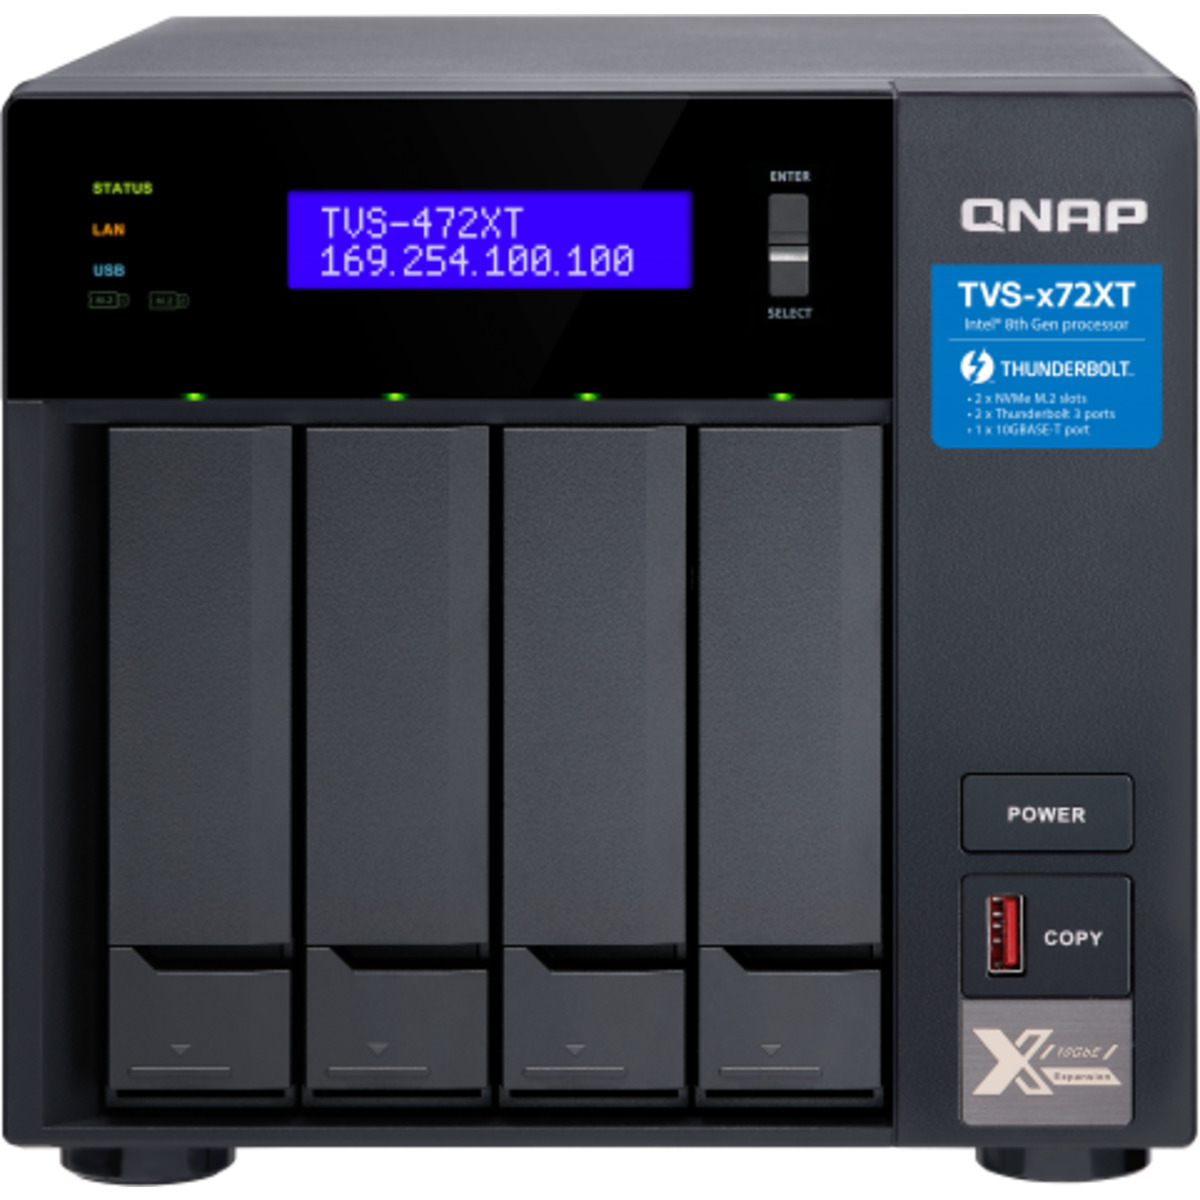 QNAP TVS-472XT Thunderbolt 3 18tb 4-Bay Desktop Multimedia / Power User / Business DAS-NAS - Combo Direct + Network Storage Device 3x6tb Seagate IronWolf Pro ST6000NT001 3.5 7200rpm SATA 6Gb/s HDD NAS Class Drives Installed - Burn-In Tested - FREE RAM UPGRADE TVS-472XT Thunderbolt 3